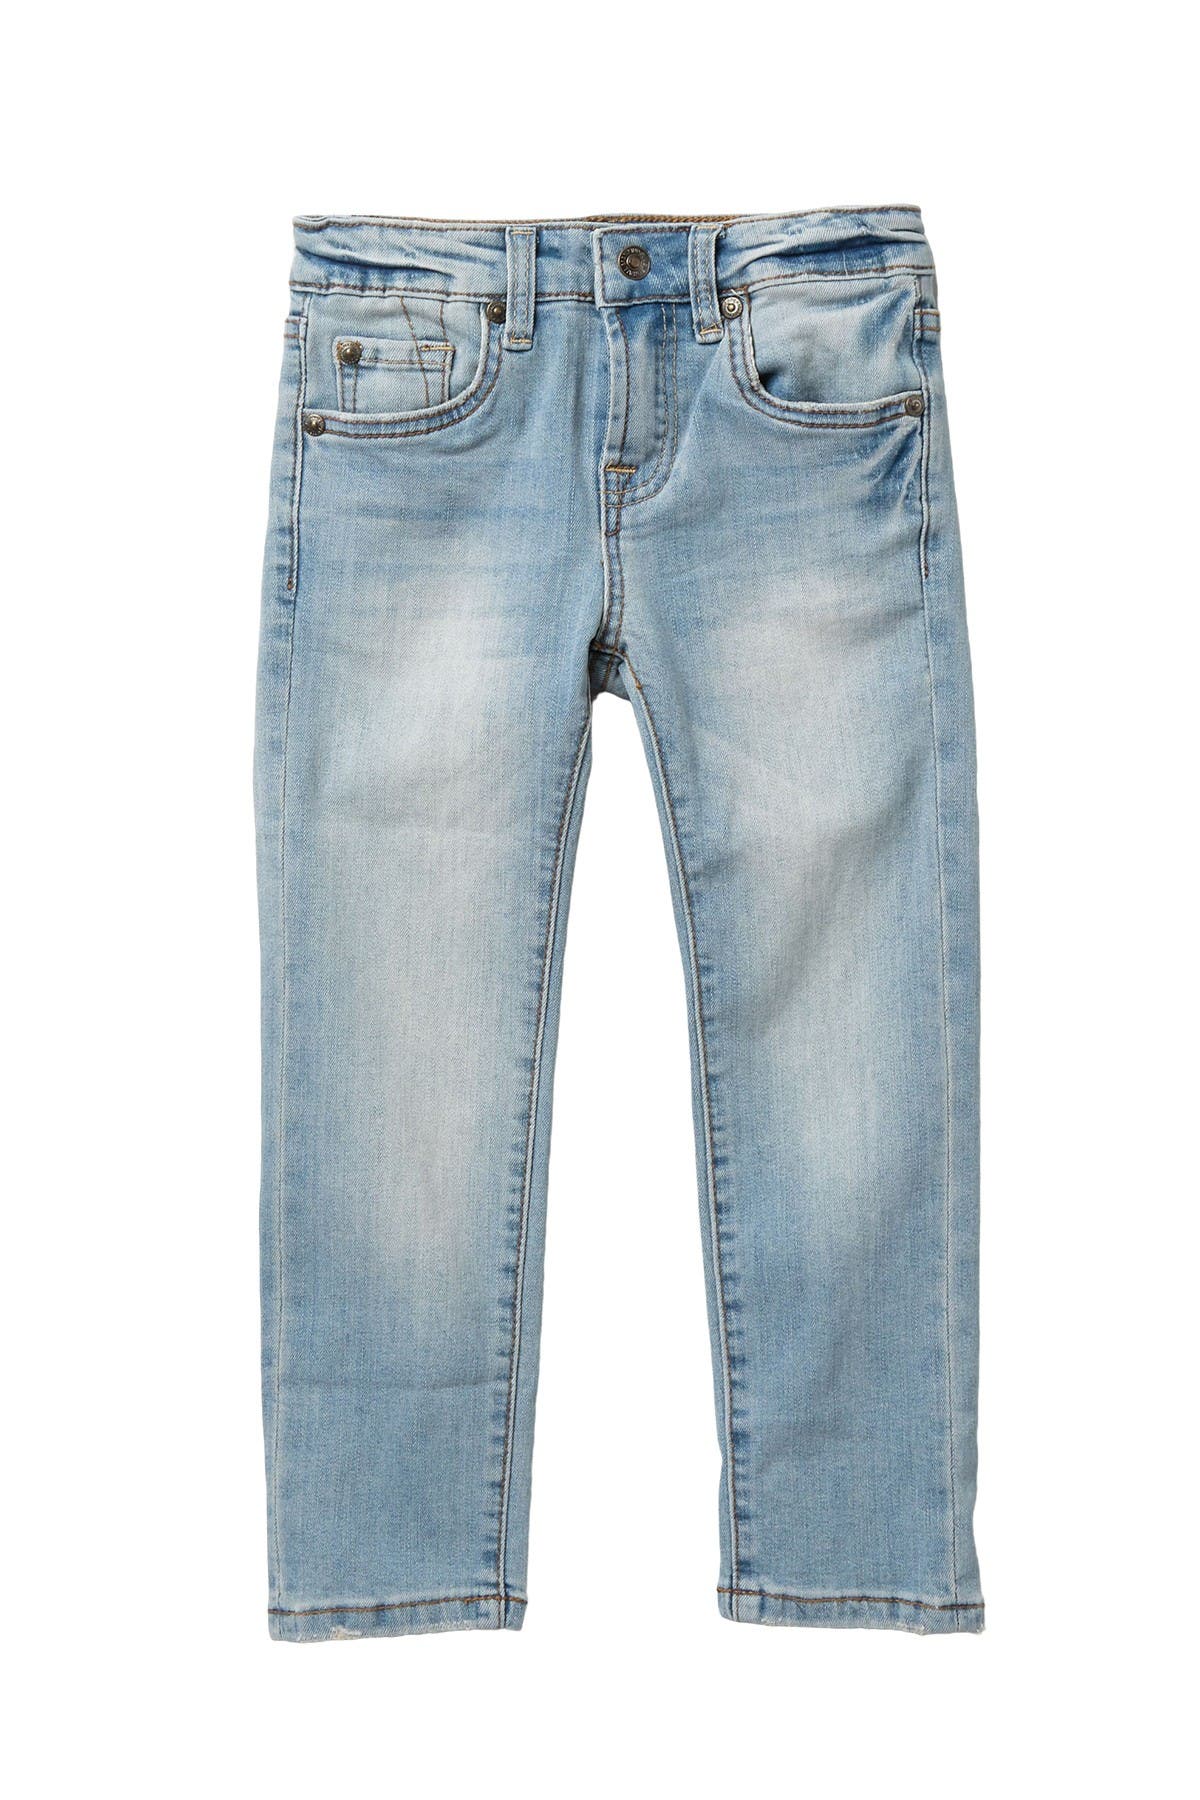 youth boys jeans